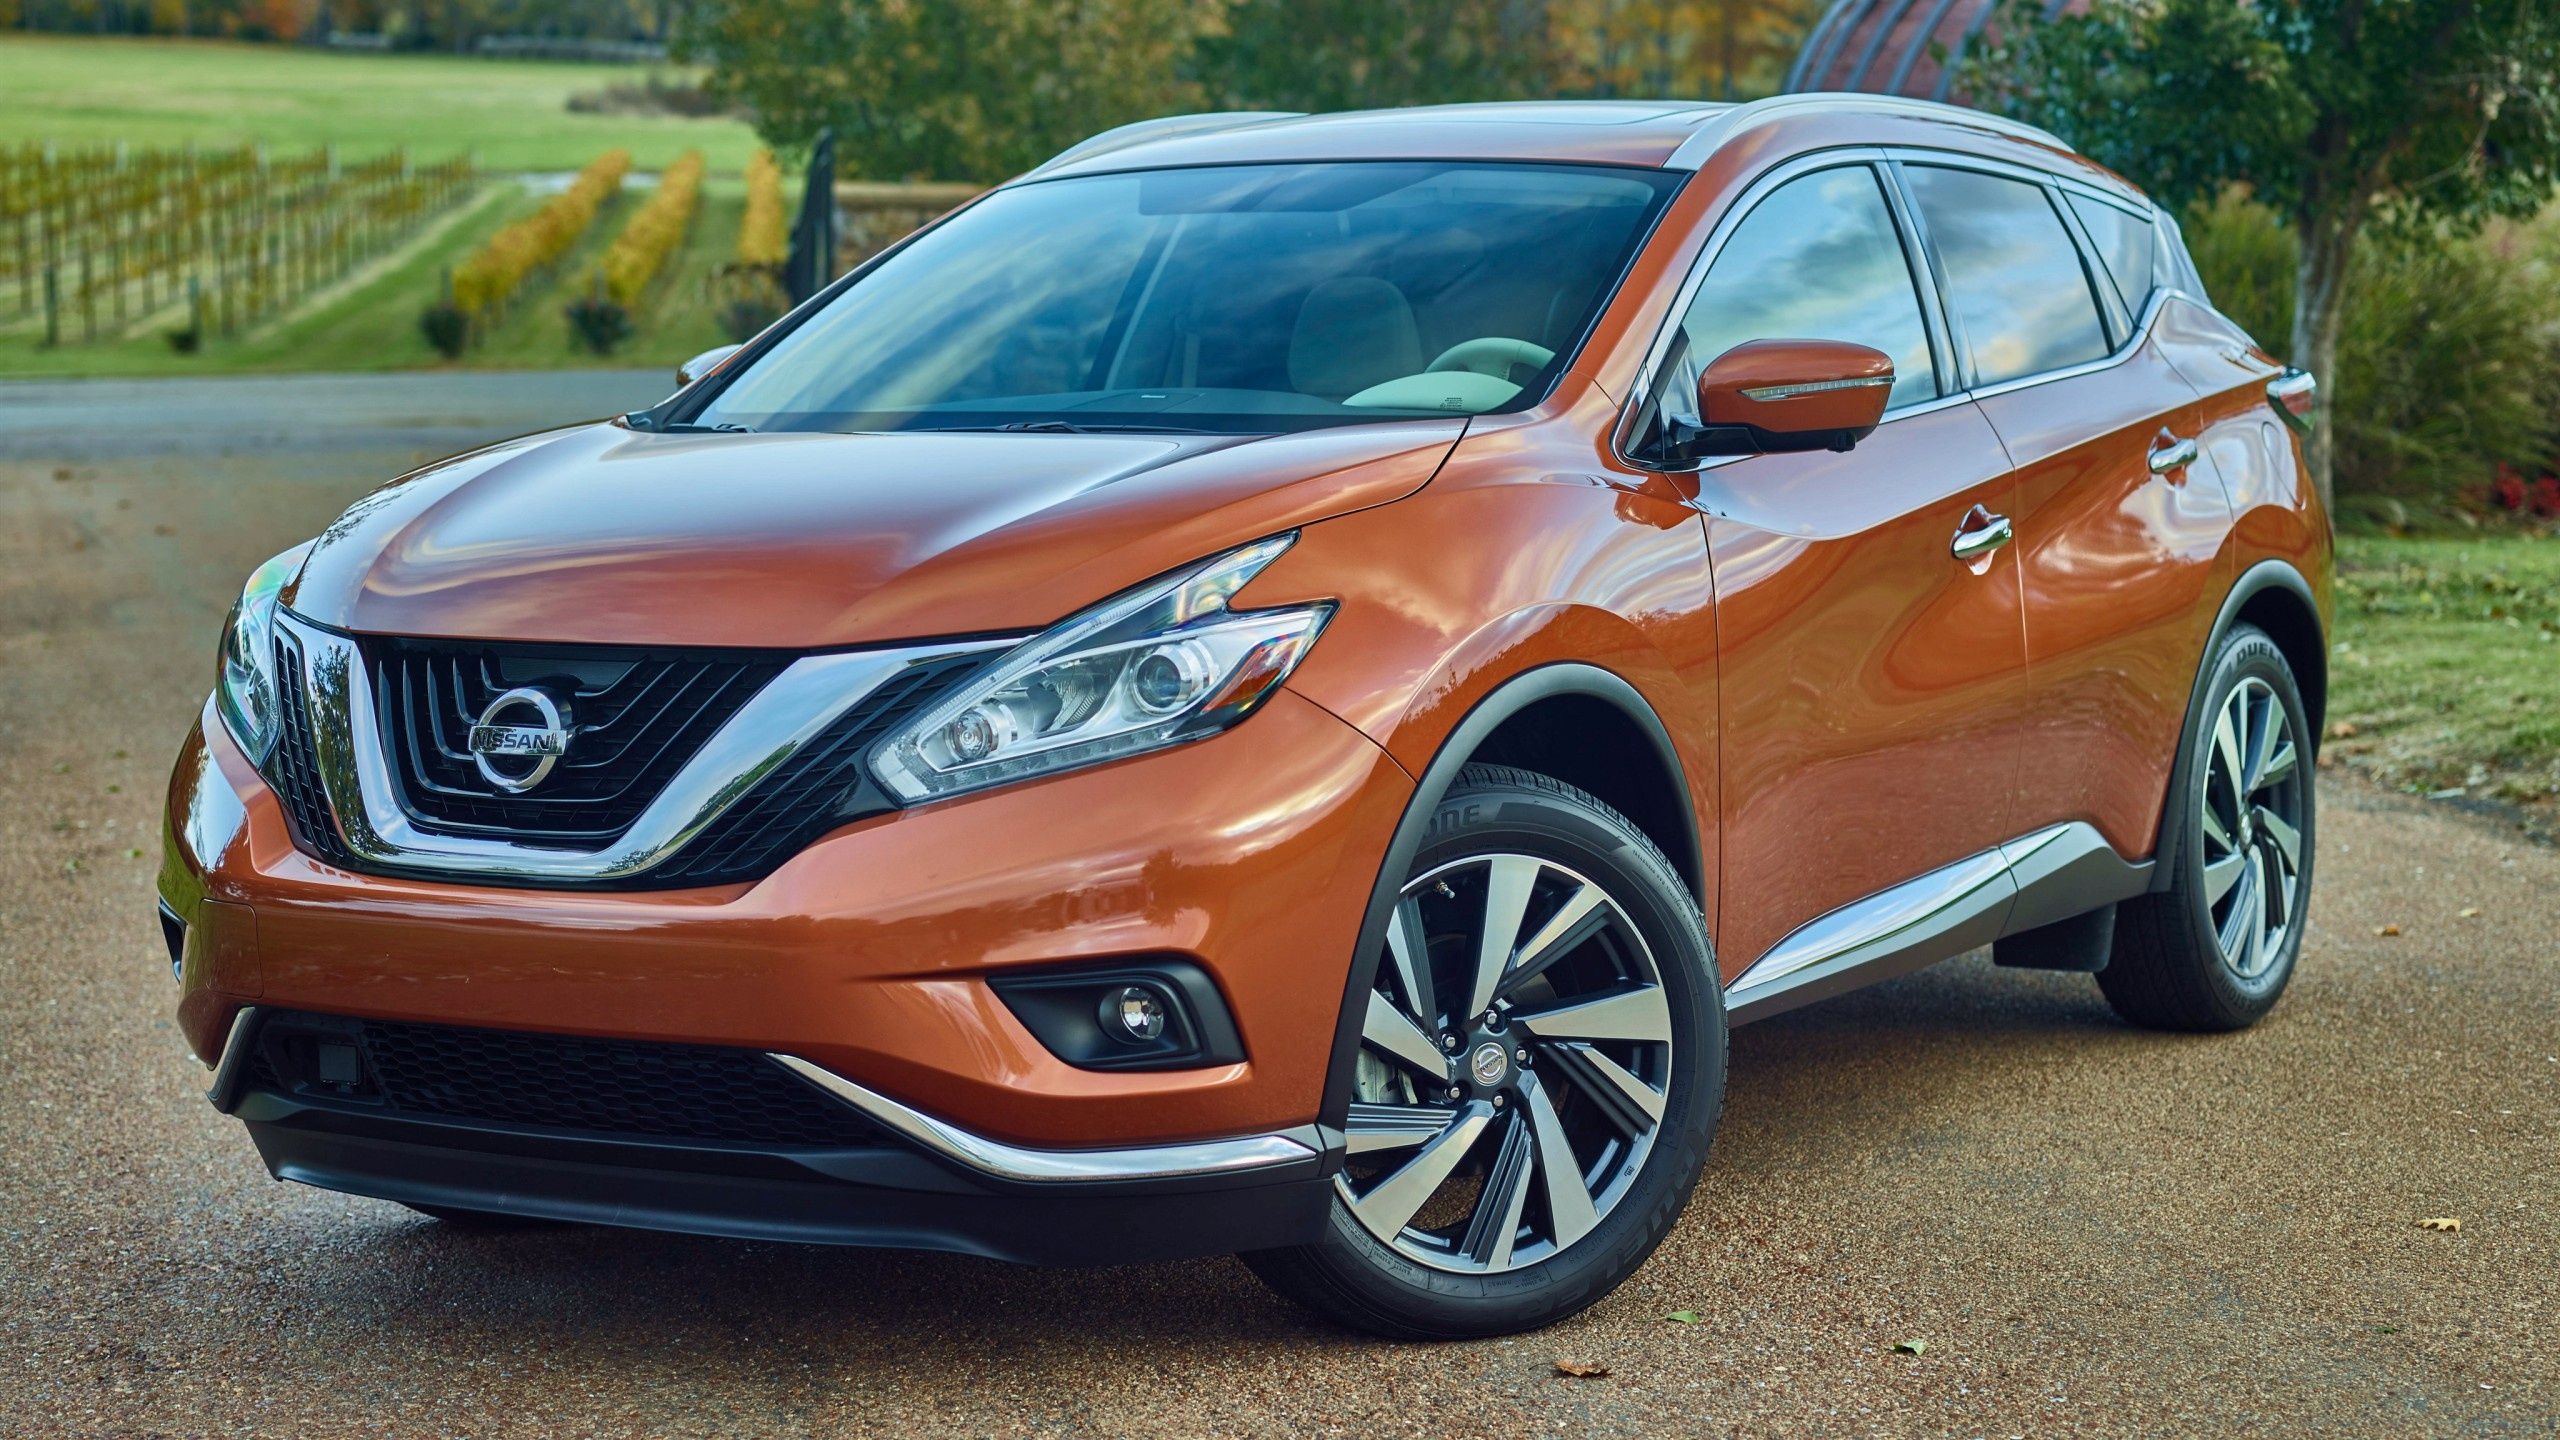 Nissan Murano, Stylish crossover, Spacious interior, Advanced safety features, 2560x1440 HD Desktop